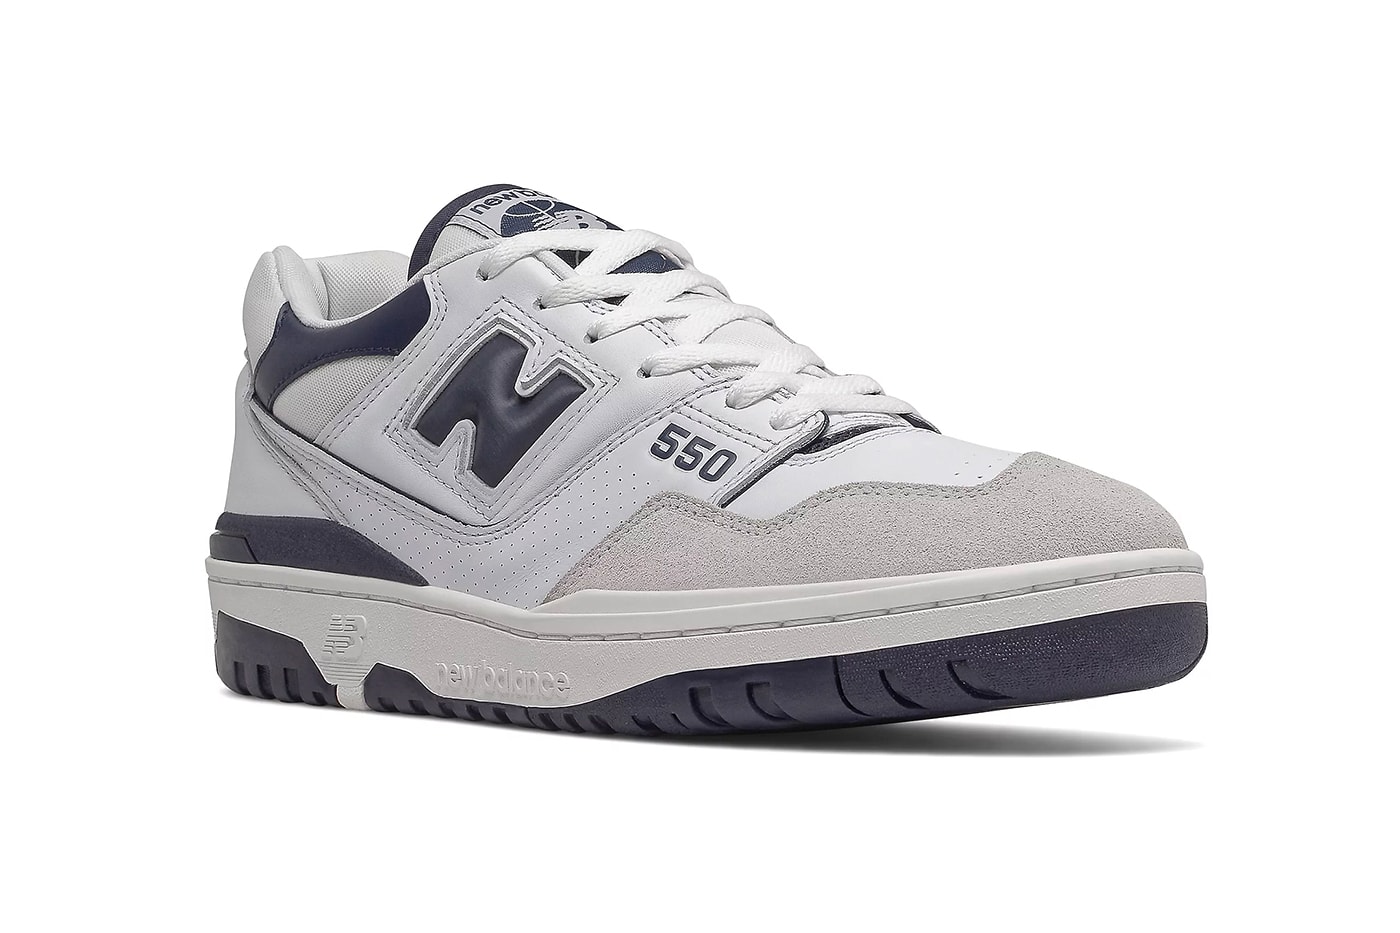 new balance 550 navy and white aime leon dore retro basketball two tone sneakers classic NB suede leather bb550wa1